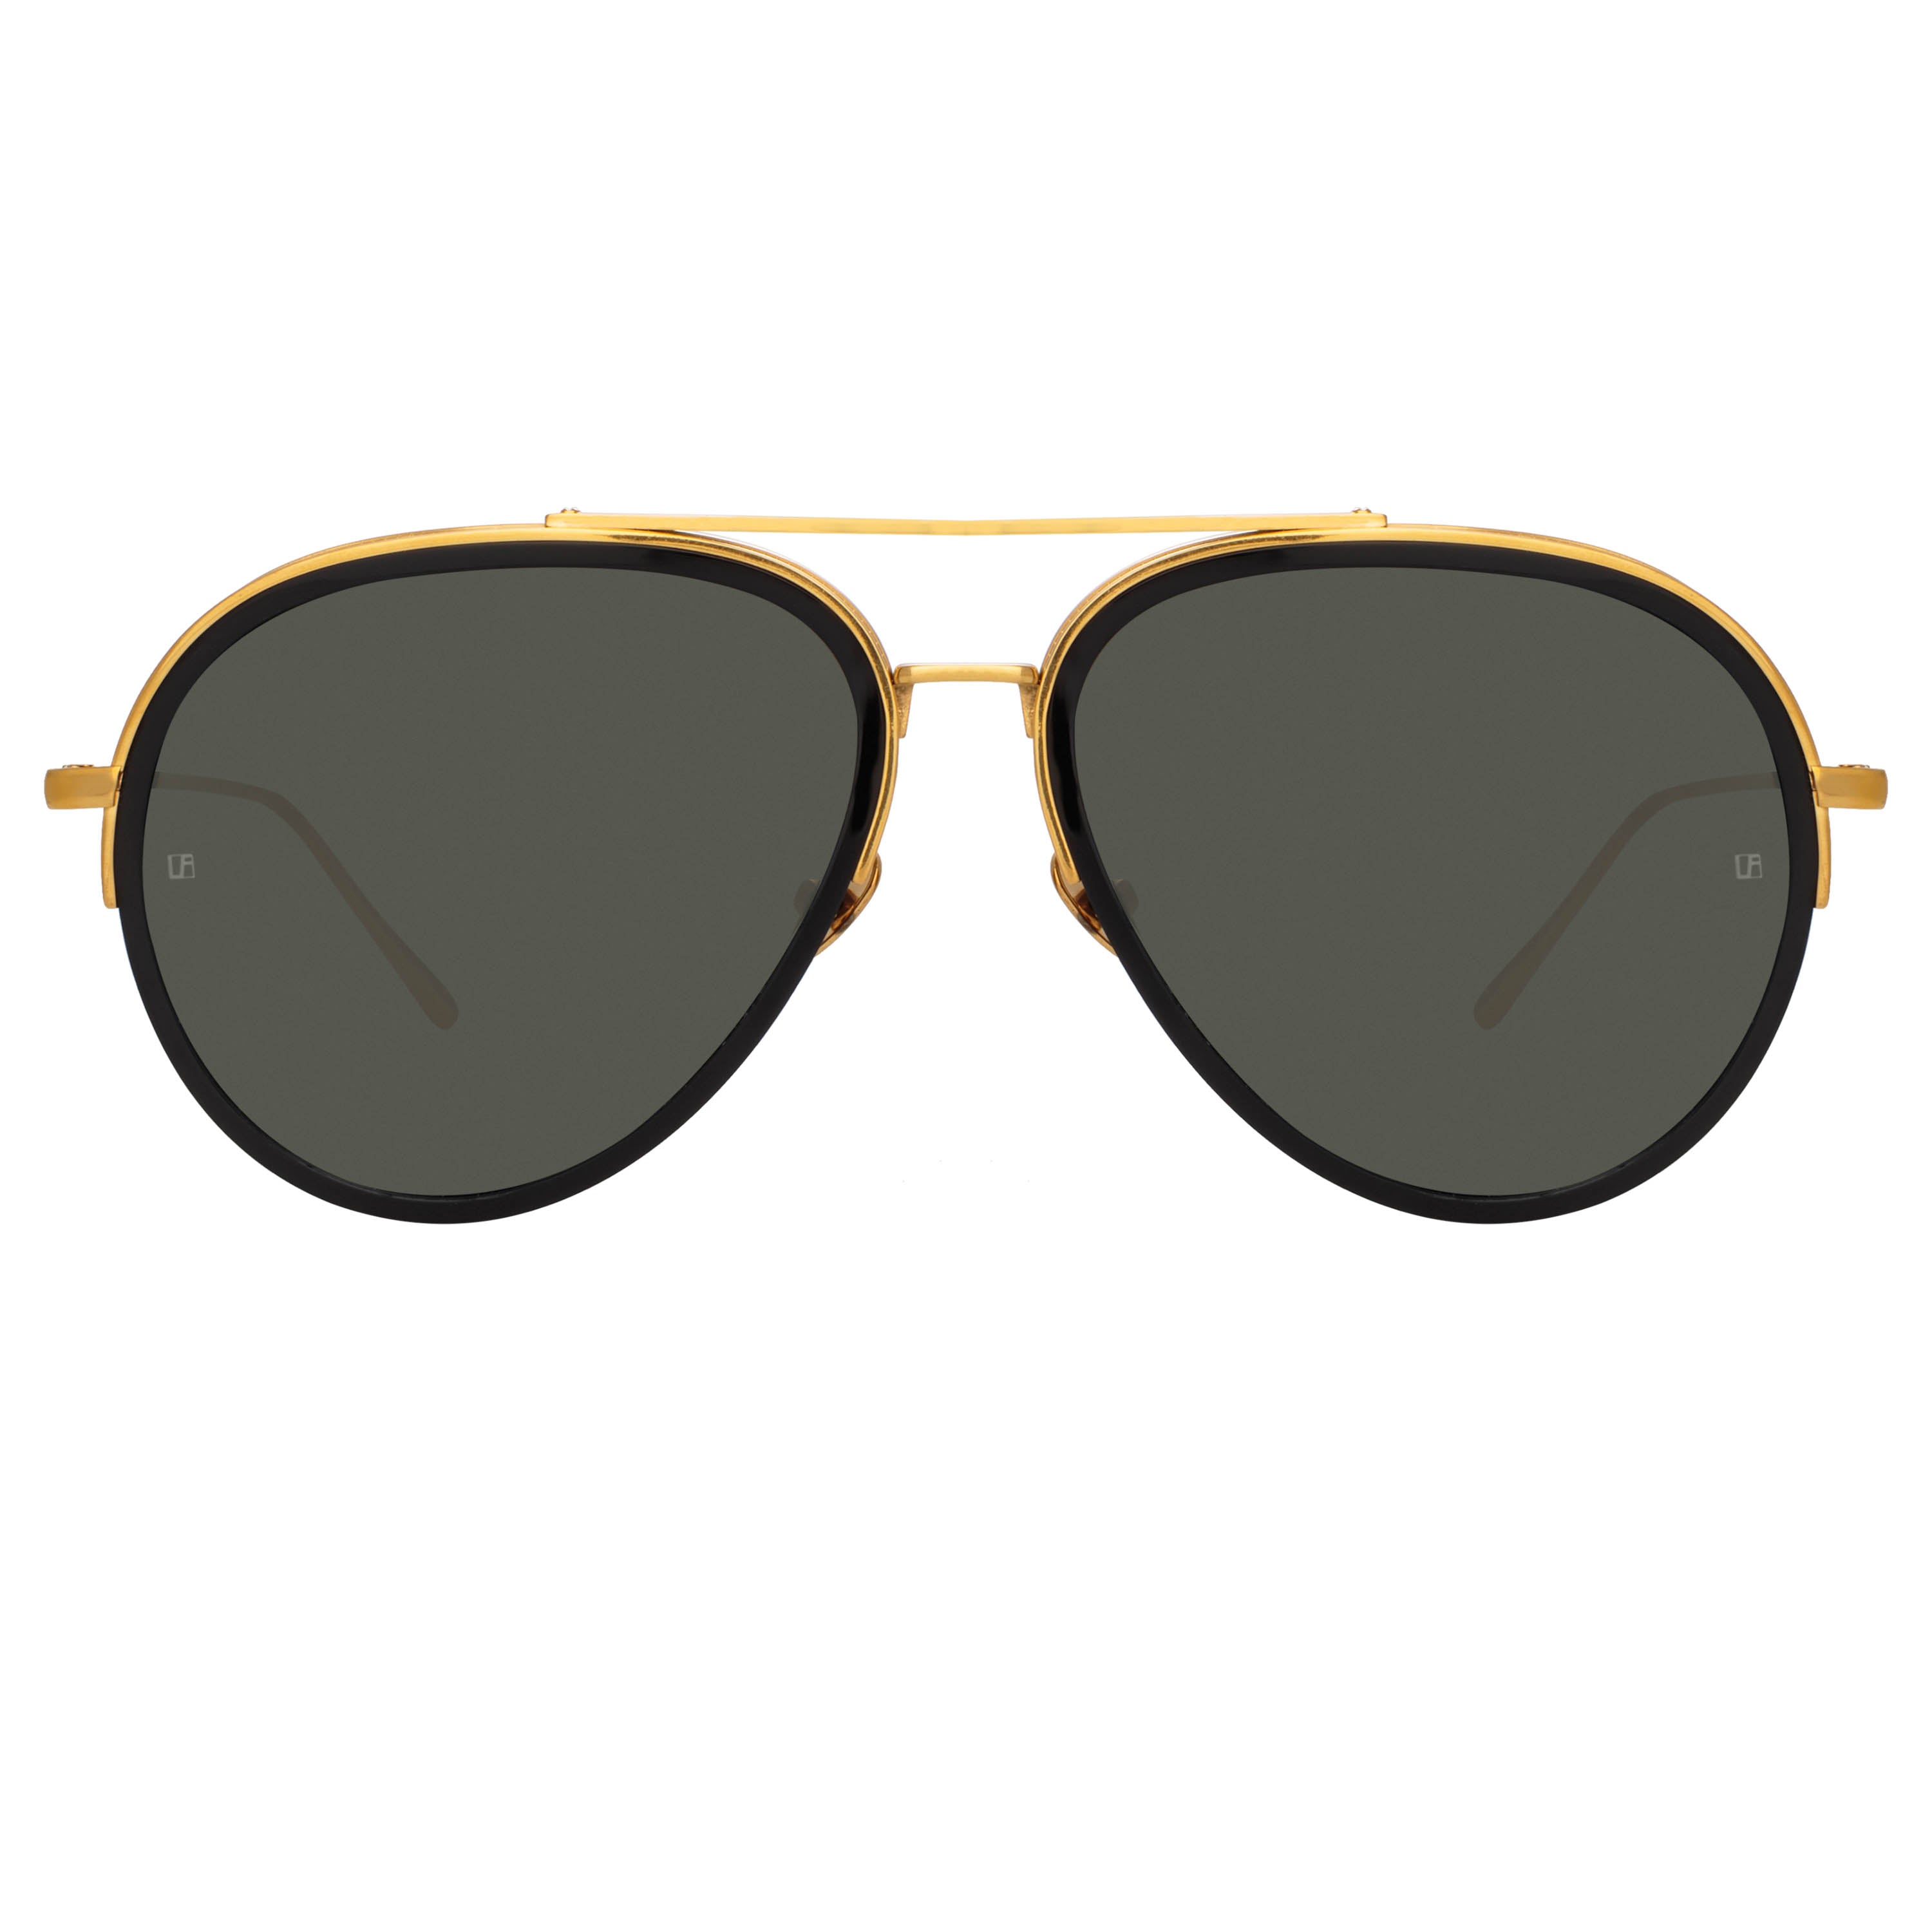 Abel Aviator Sunglasses in Black and Yellow Gold